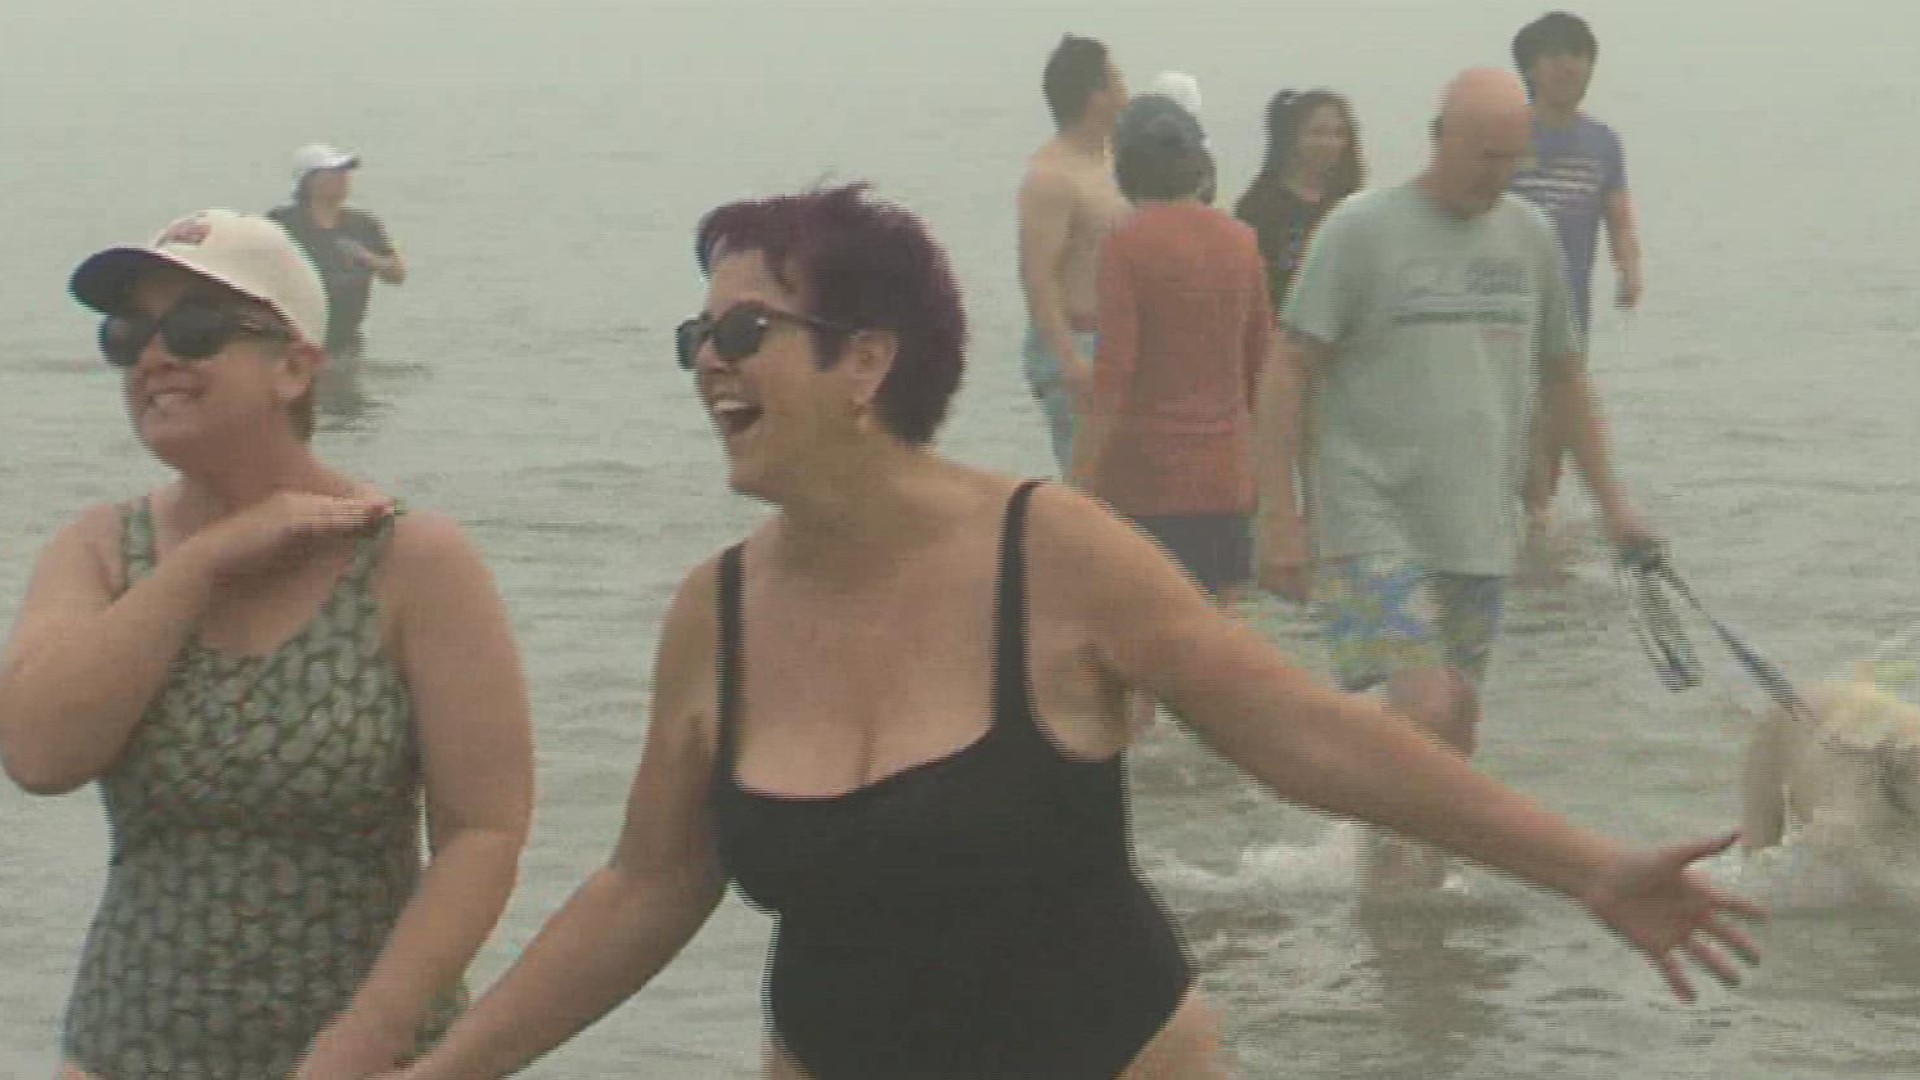 One swimmer told 3NEWS that she's been a proud supporter of the plunge since it's inception. She said that this year's event was much colder than previous years.